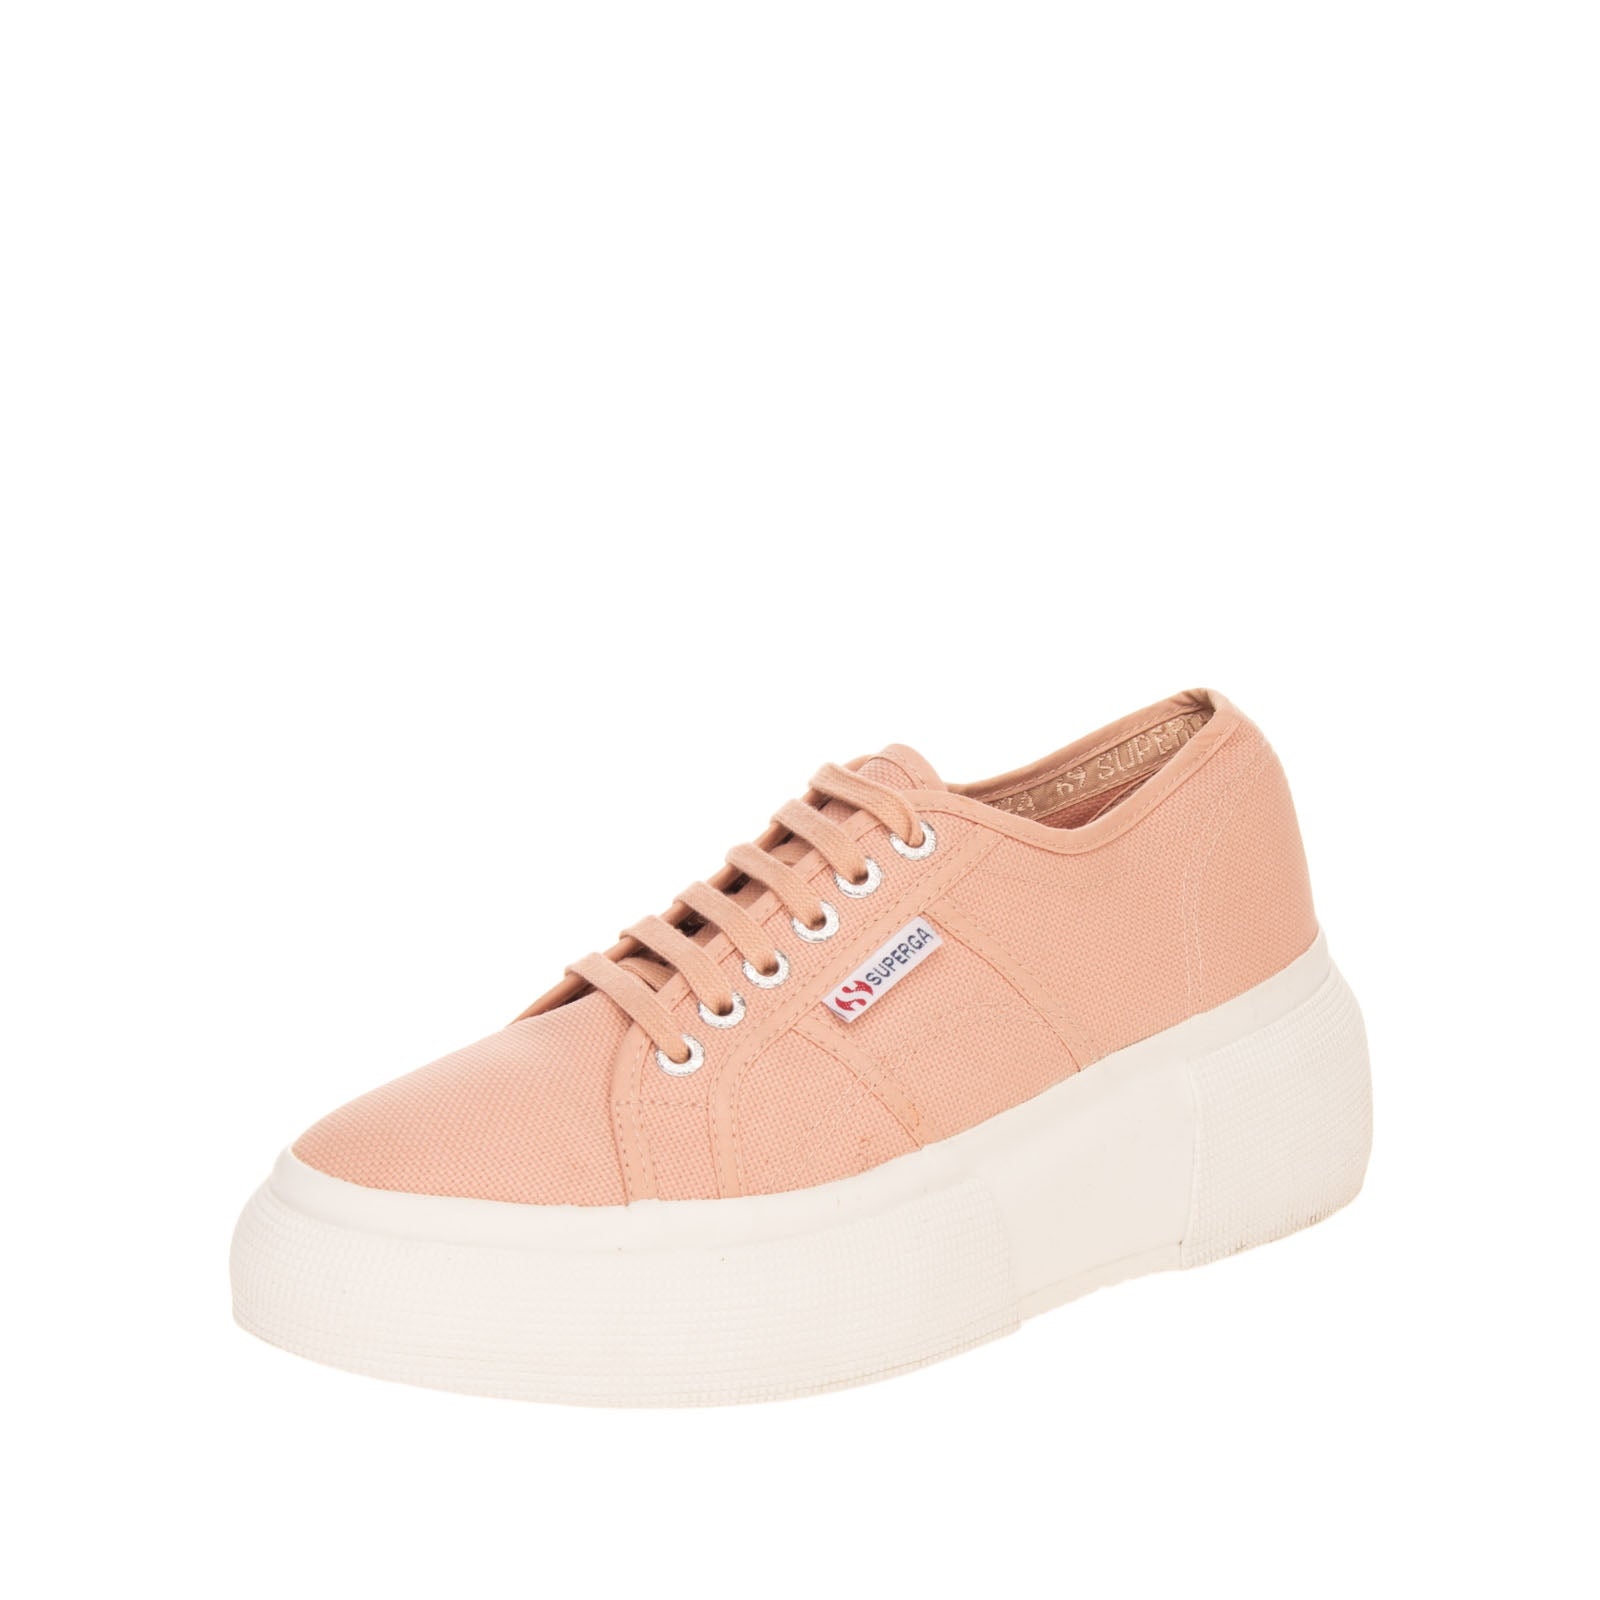 SUPERGA Canvas Sneakers Size 37 UK 4 US 6.5 Branded Grommets Platform Sole gallery main photo